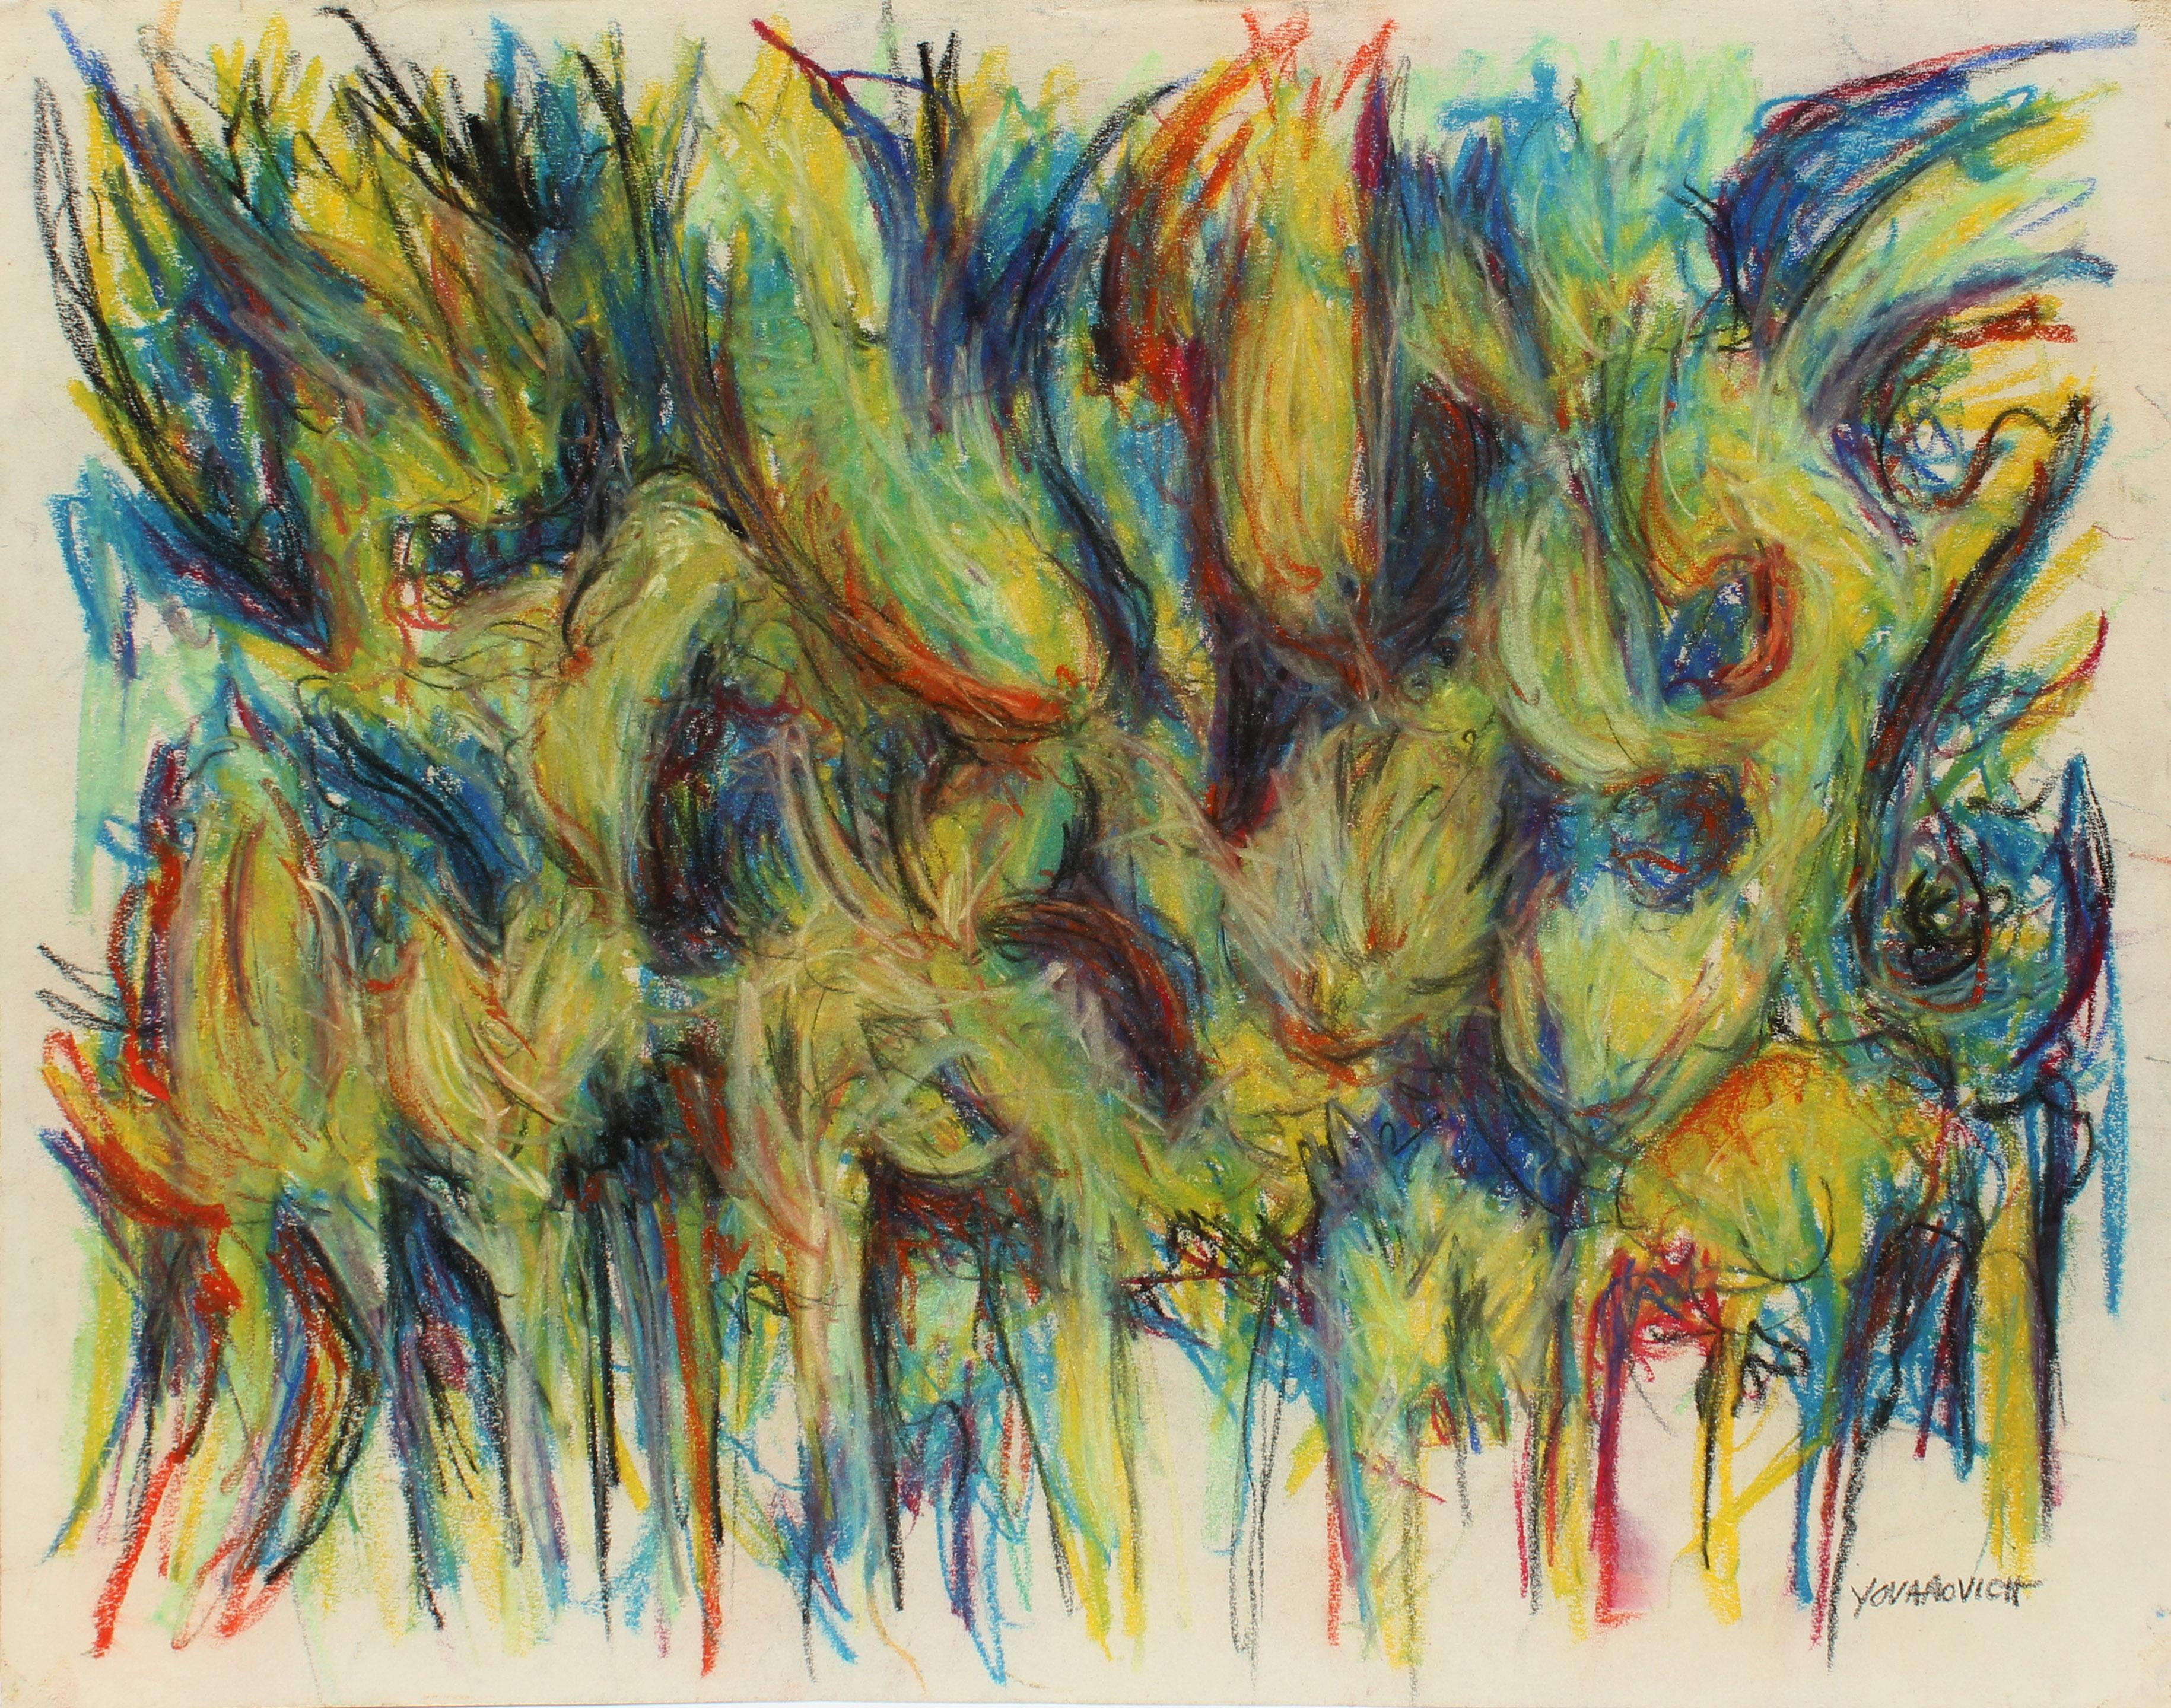 Mid-Century Modern abstract oil pastel drawing by American artist Toma Tovanovich (1931- 2016).   

The paper size is 17